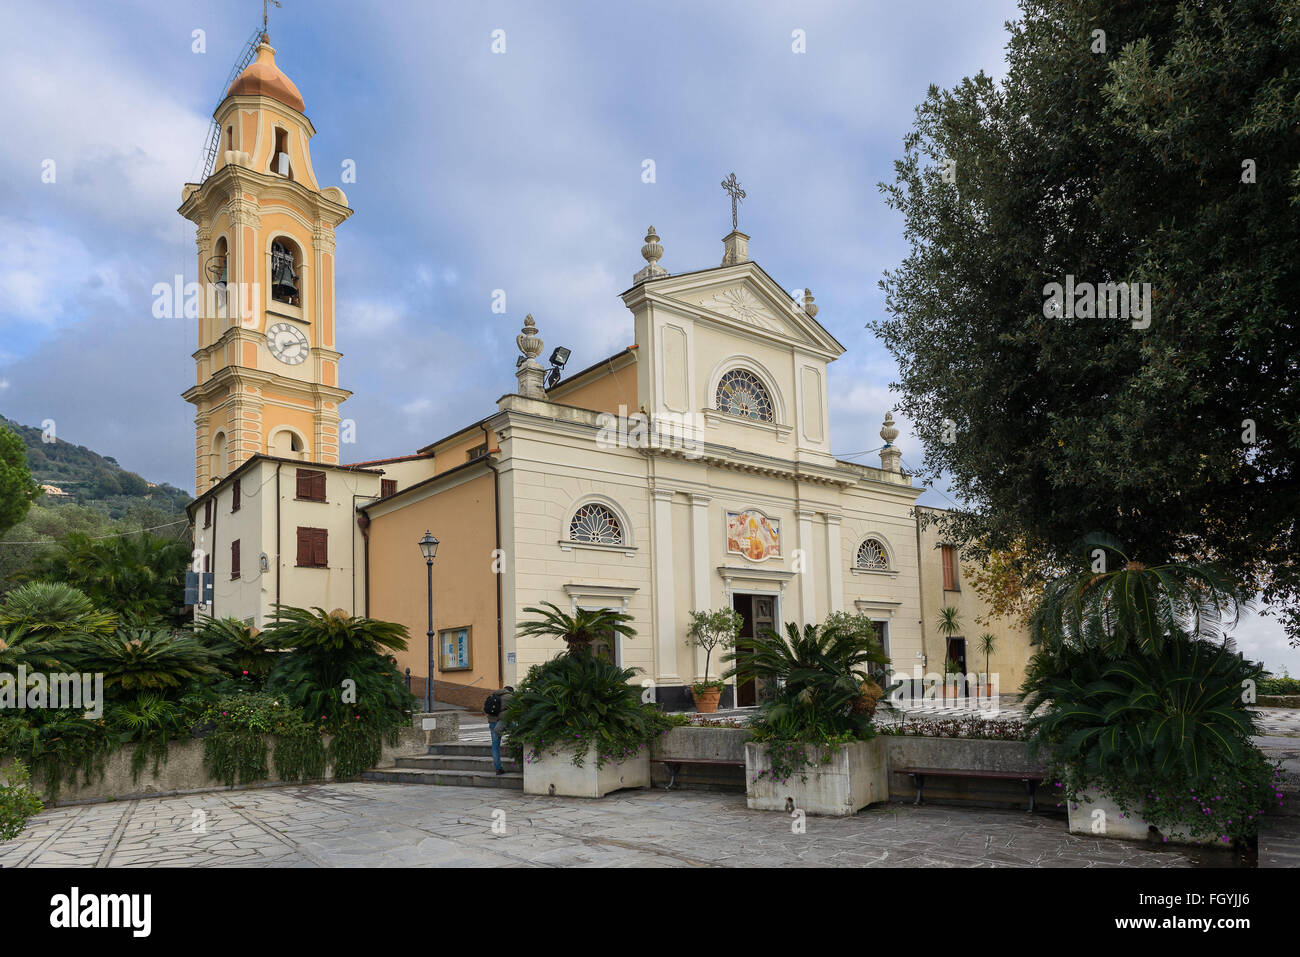 Ancient church of Sant'Ambrogio situated in Zoagli, Italy Stock Photo